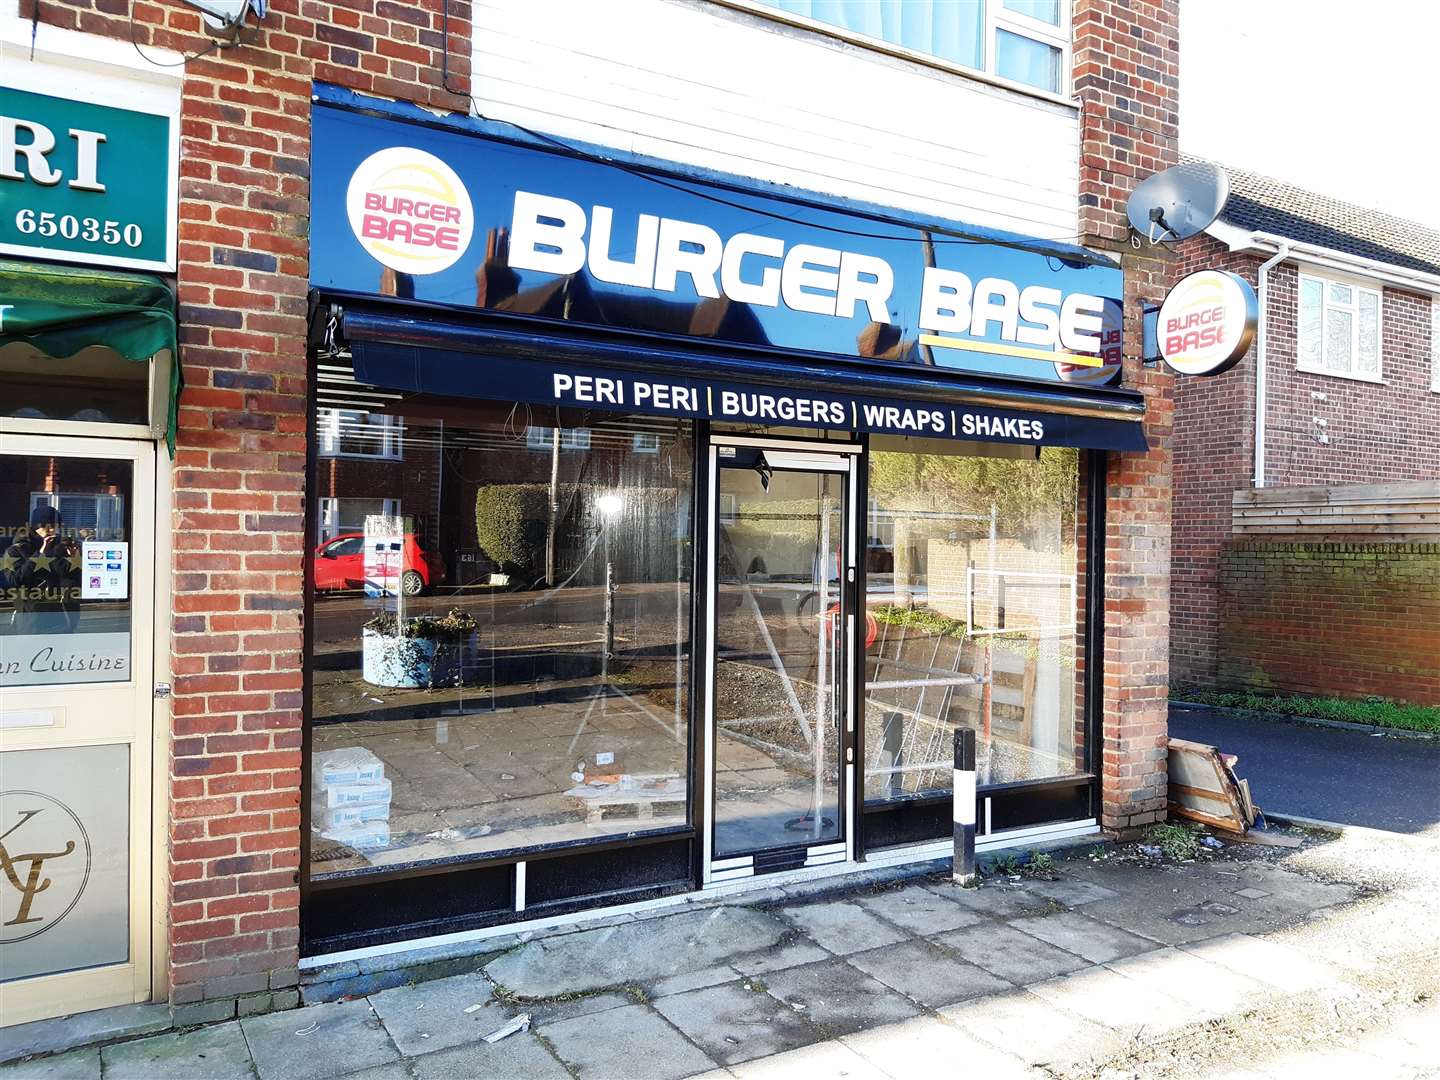 The new frontage shows a marked difference to the initial Burger Base concept